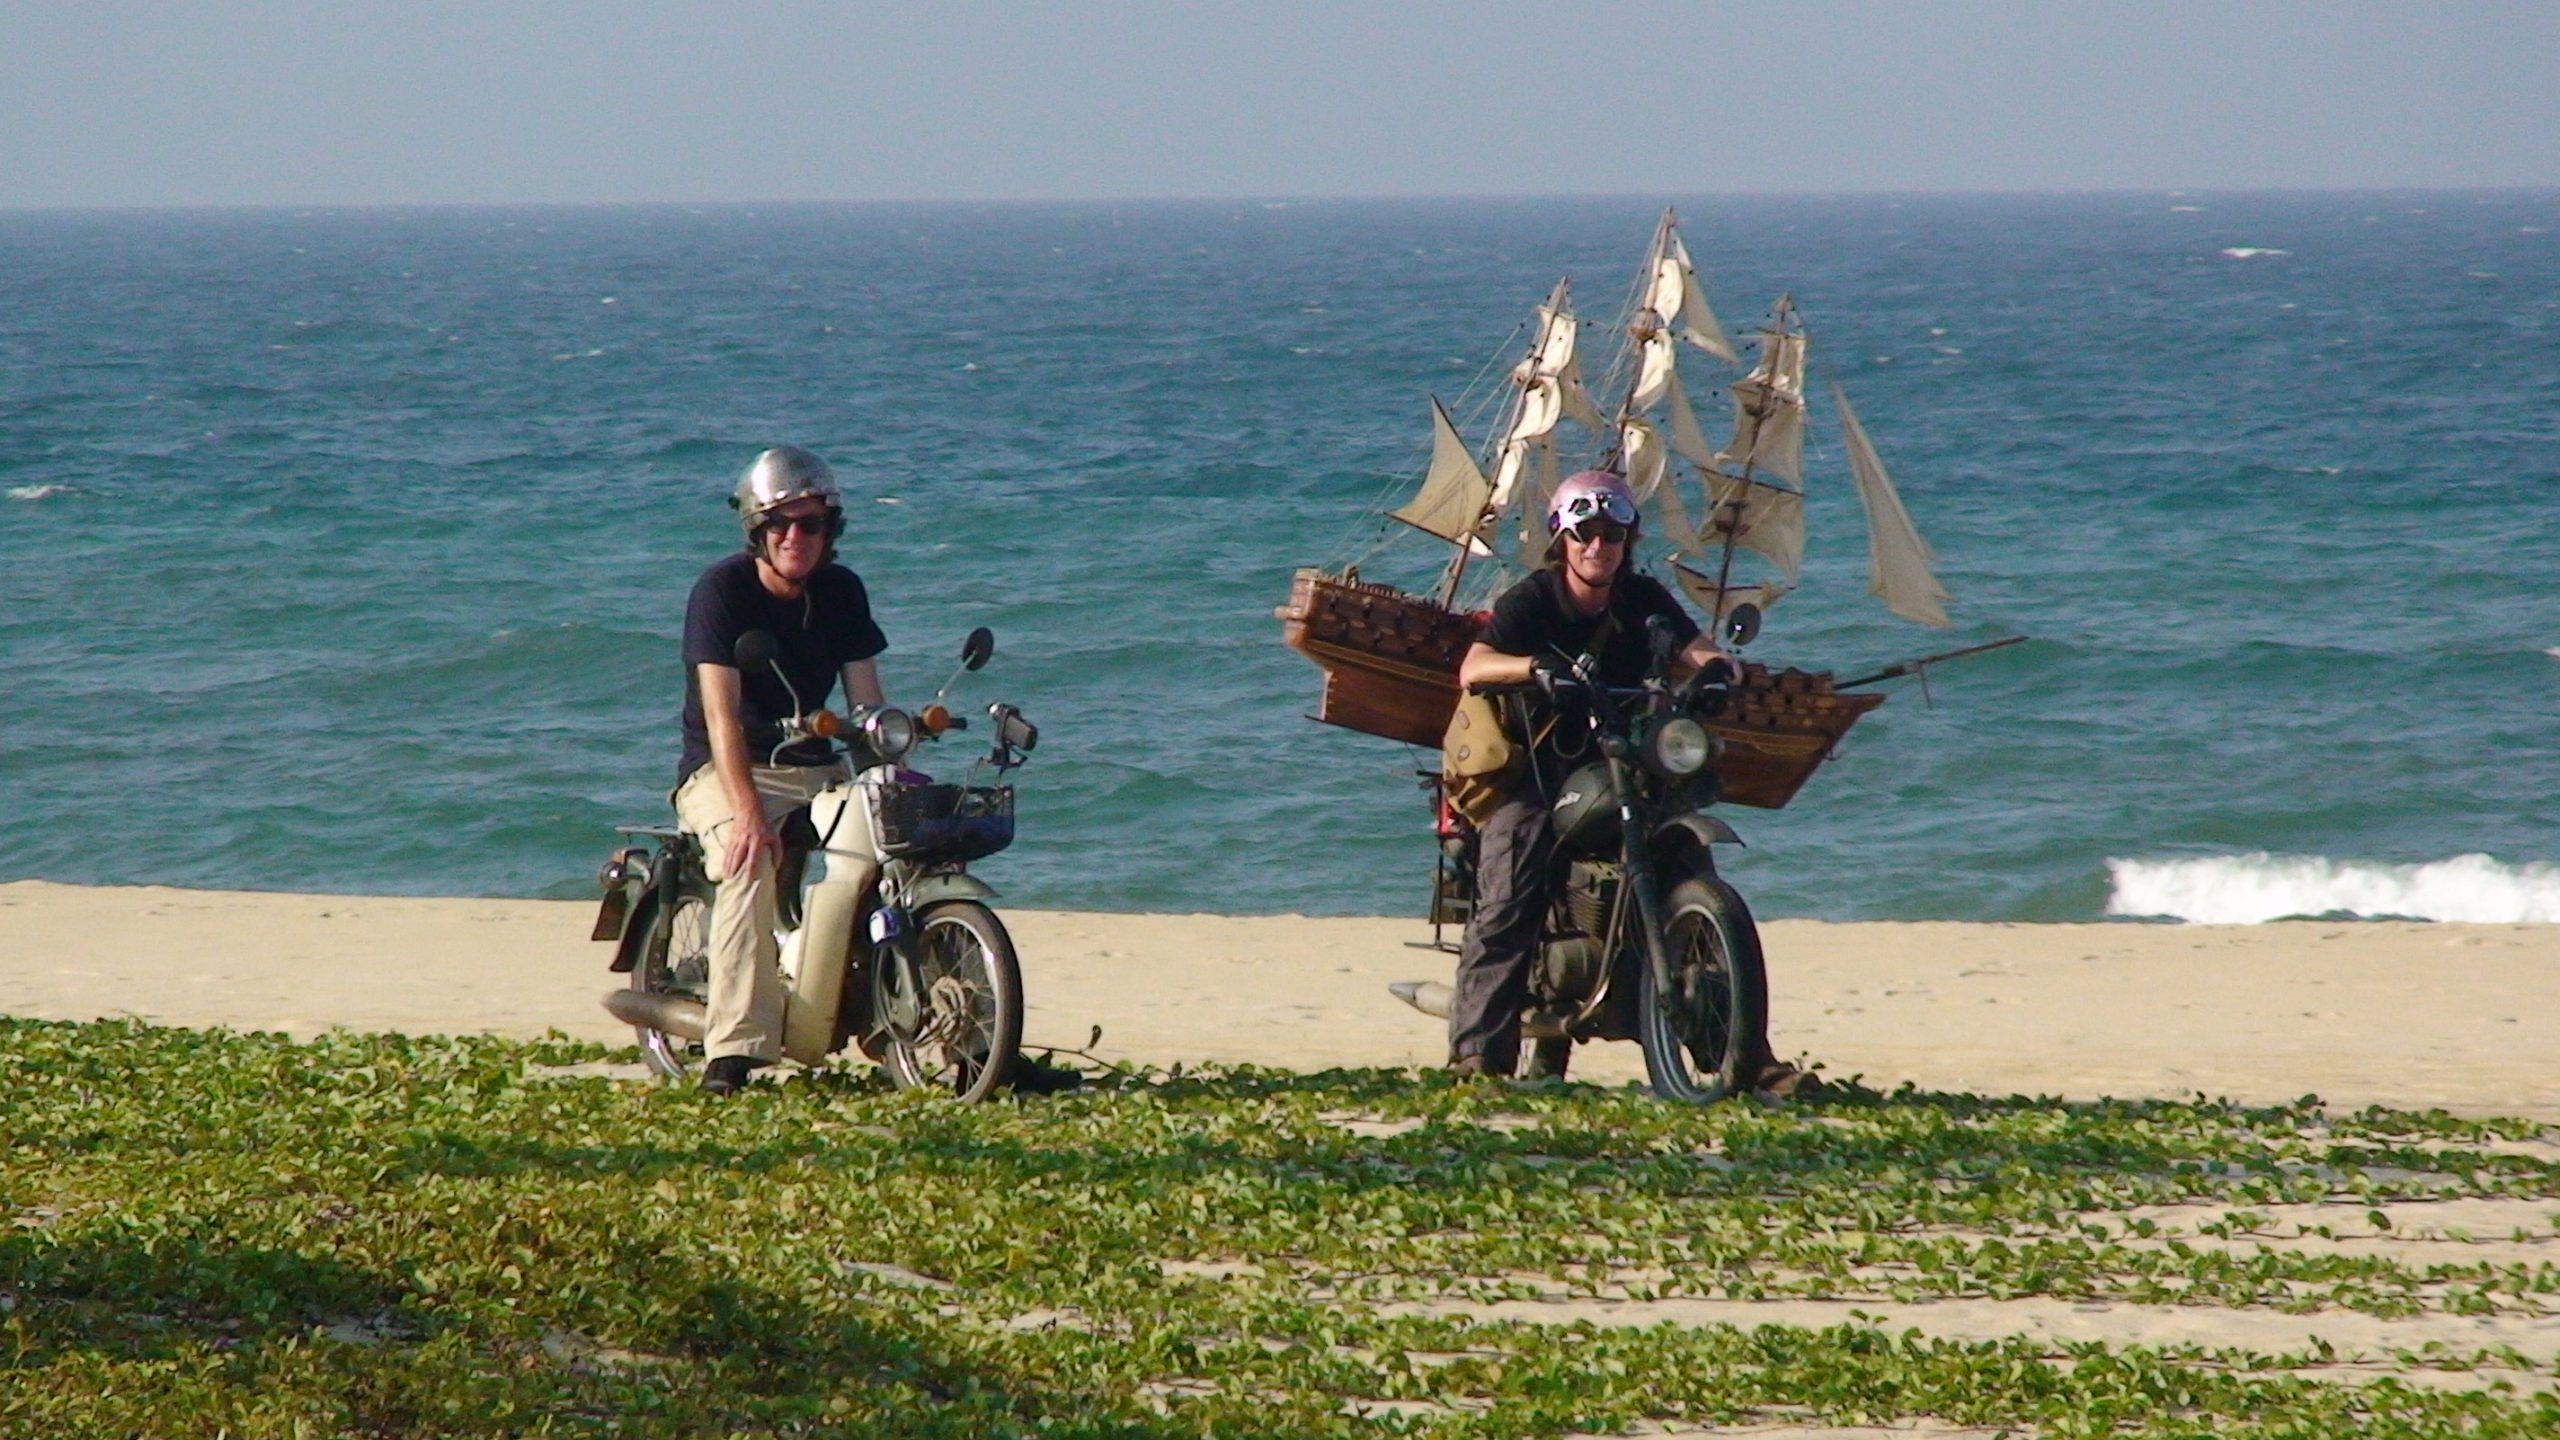 James May and Richard Hammond have a break while filming at the beach near Hoi An